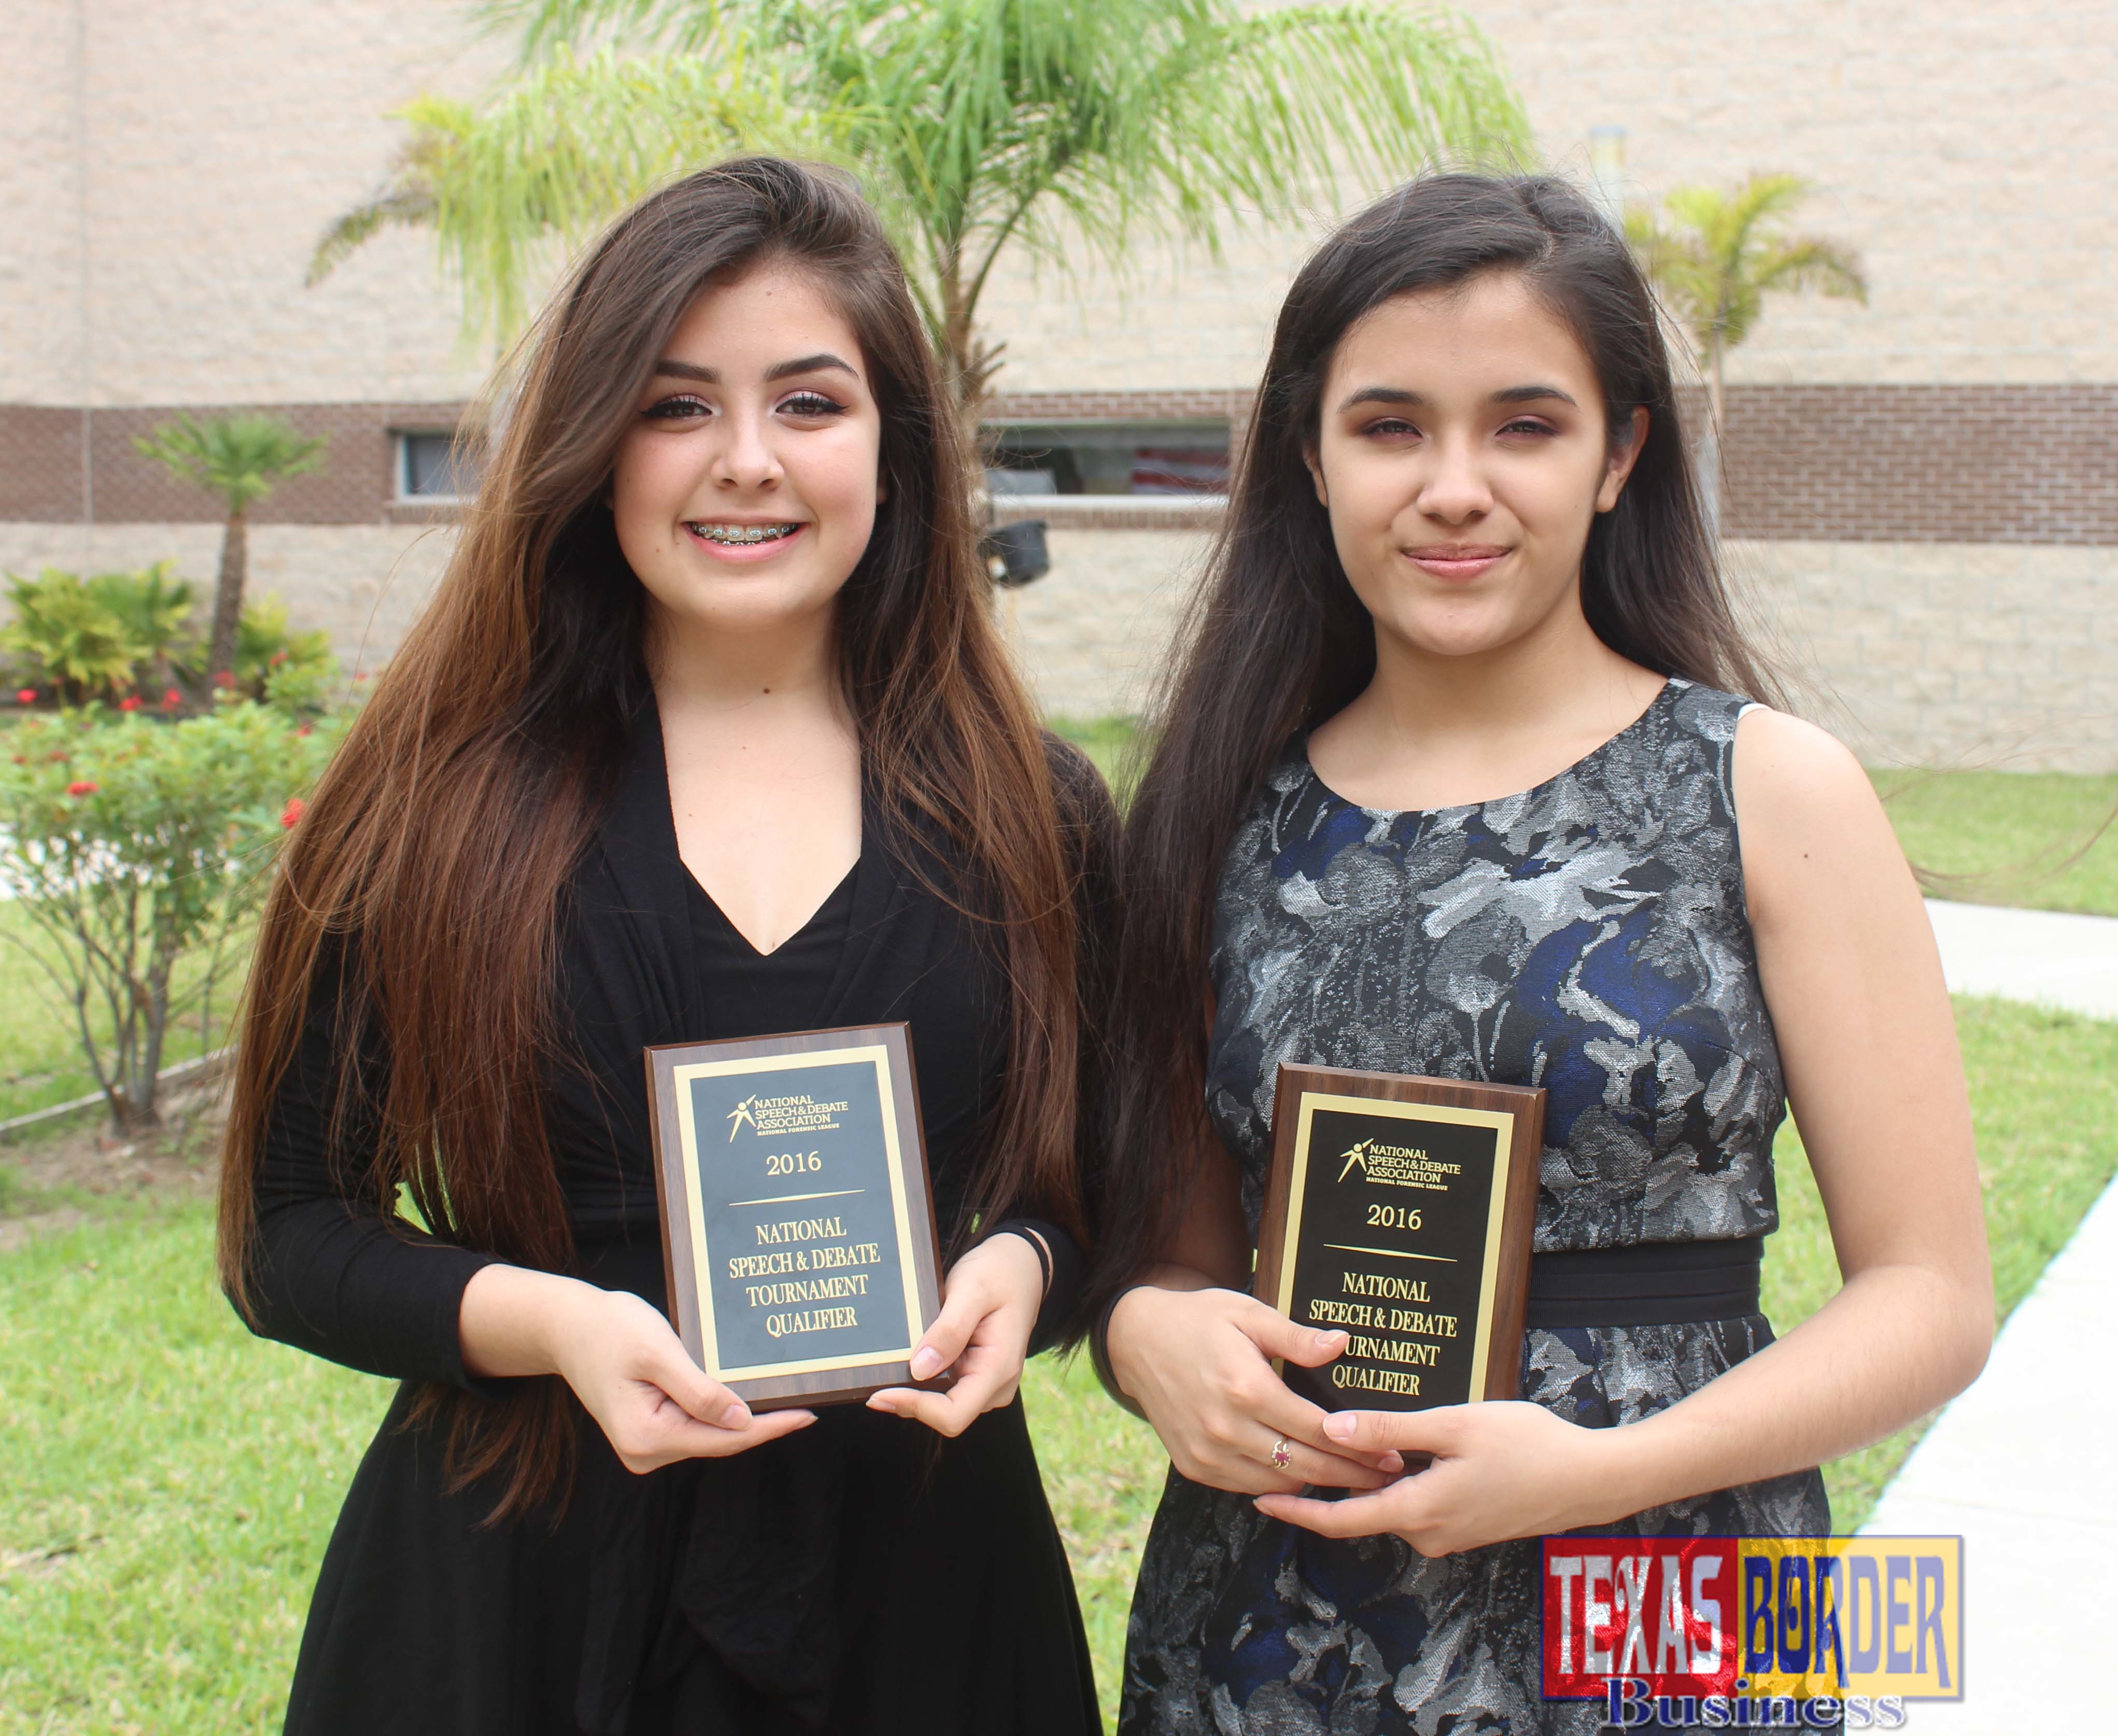 Pictured (from left) - PSJA Southwest Early College HS Senior Natalie Di Grazia and Junior Adaylin Alvarez to compete in Salt Lake City this month at the National Speech and Debate Association Tournament.